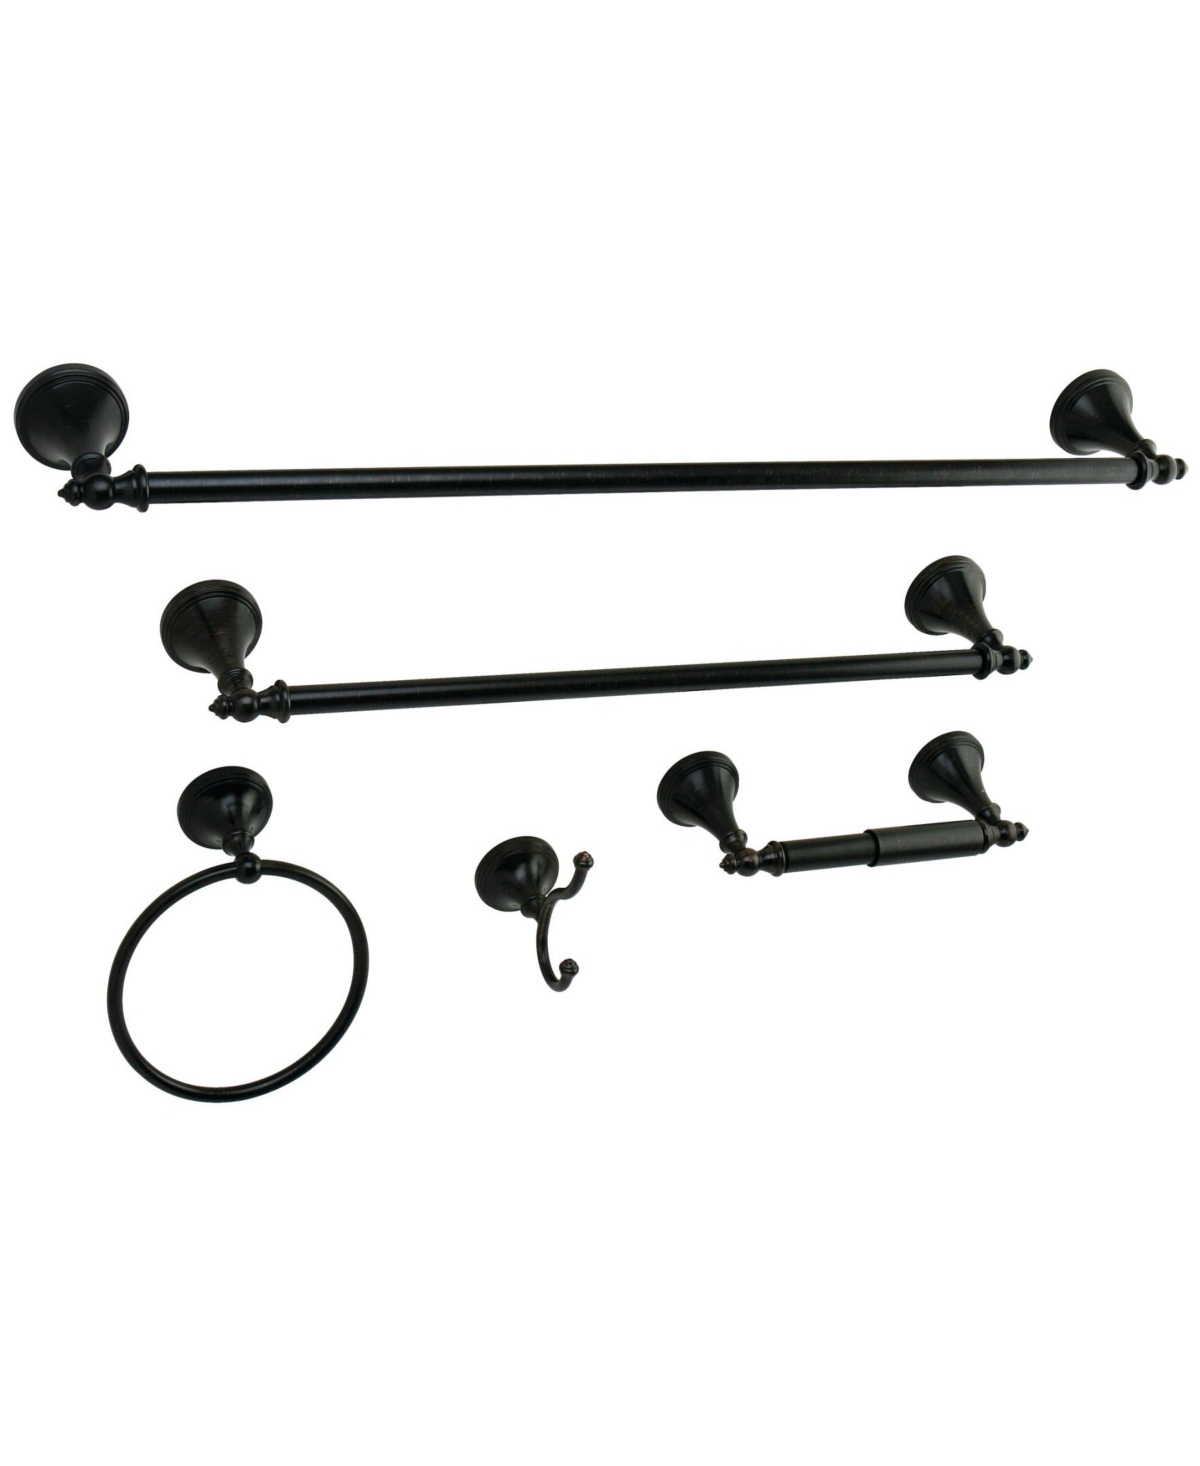 Kingston Brass Naples 18-inch And 24-inch Towel Bar Bathroom Accessory Set Bedding In Black